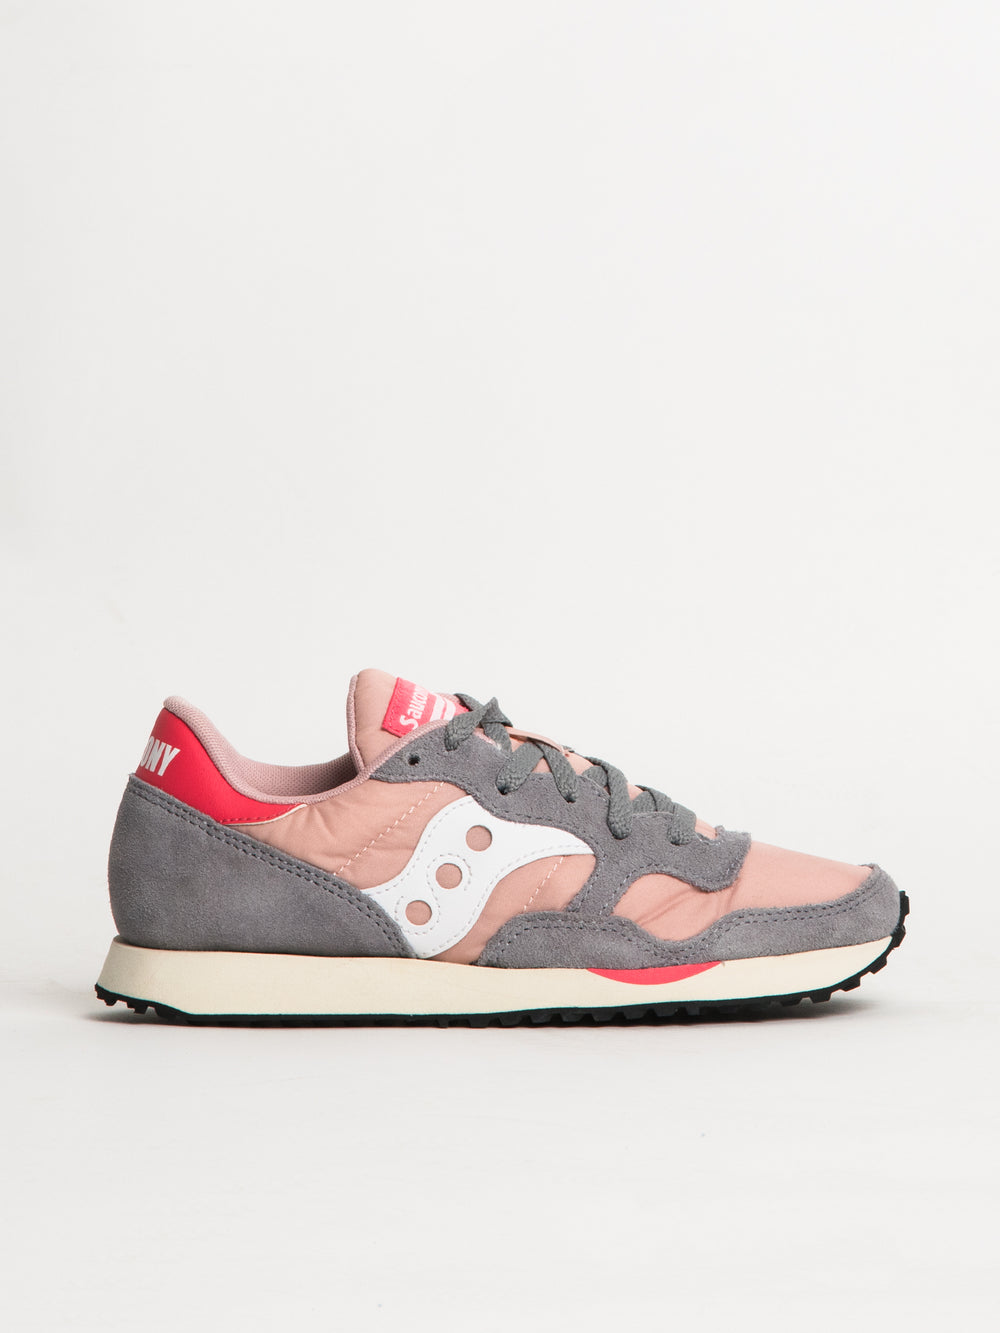 WOMENS SAUCONY DXN TRAINER